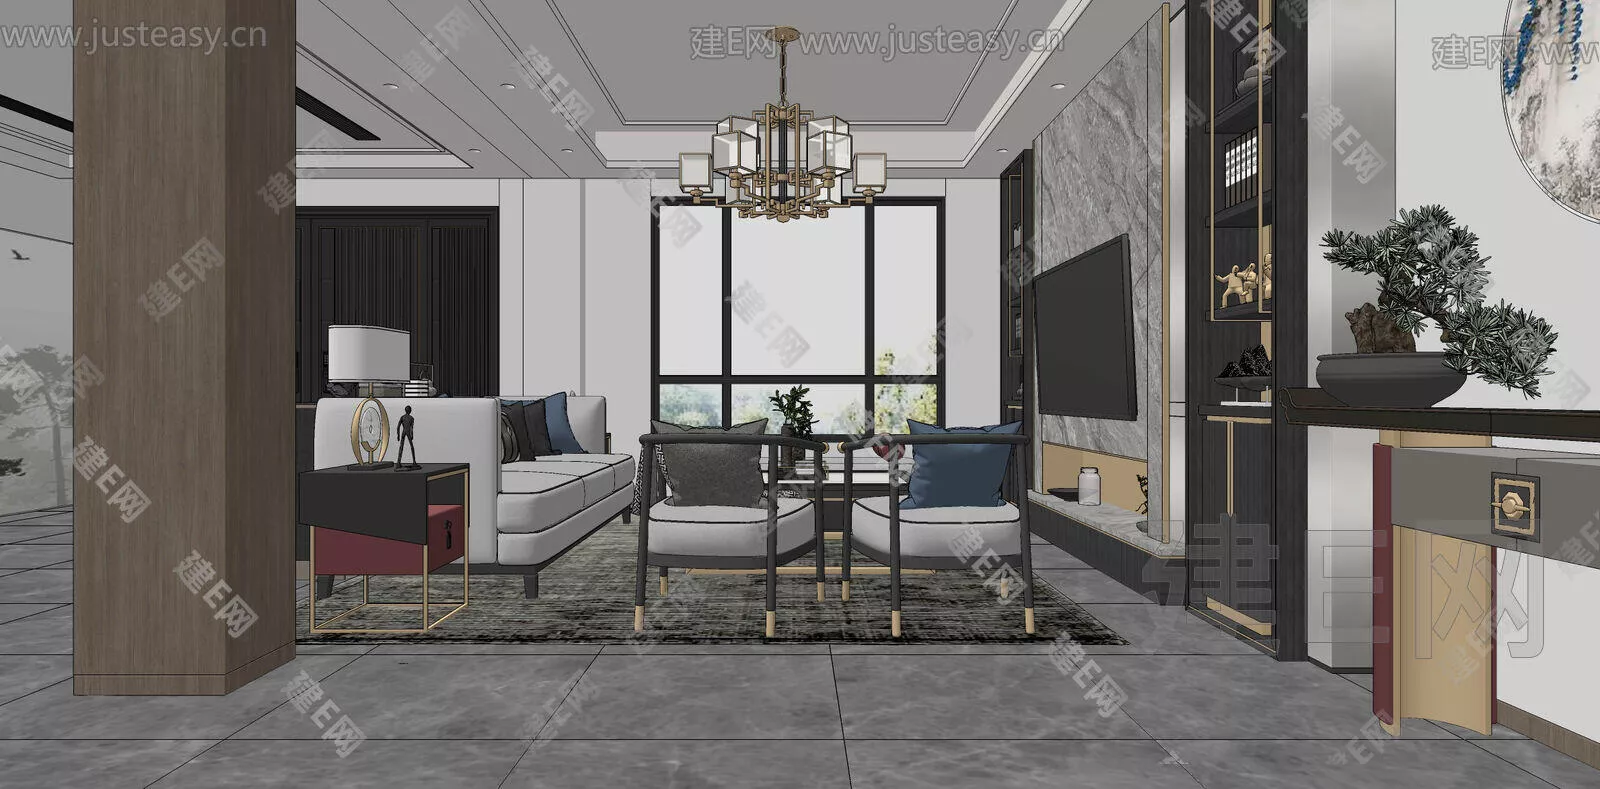 CHINESE LIVING ROOM - SKETCHUP 3D SCENE - ENSCAPE - 113395181